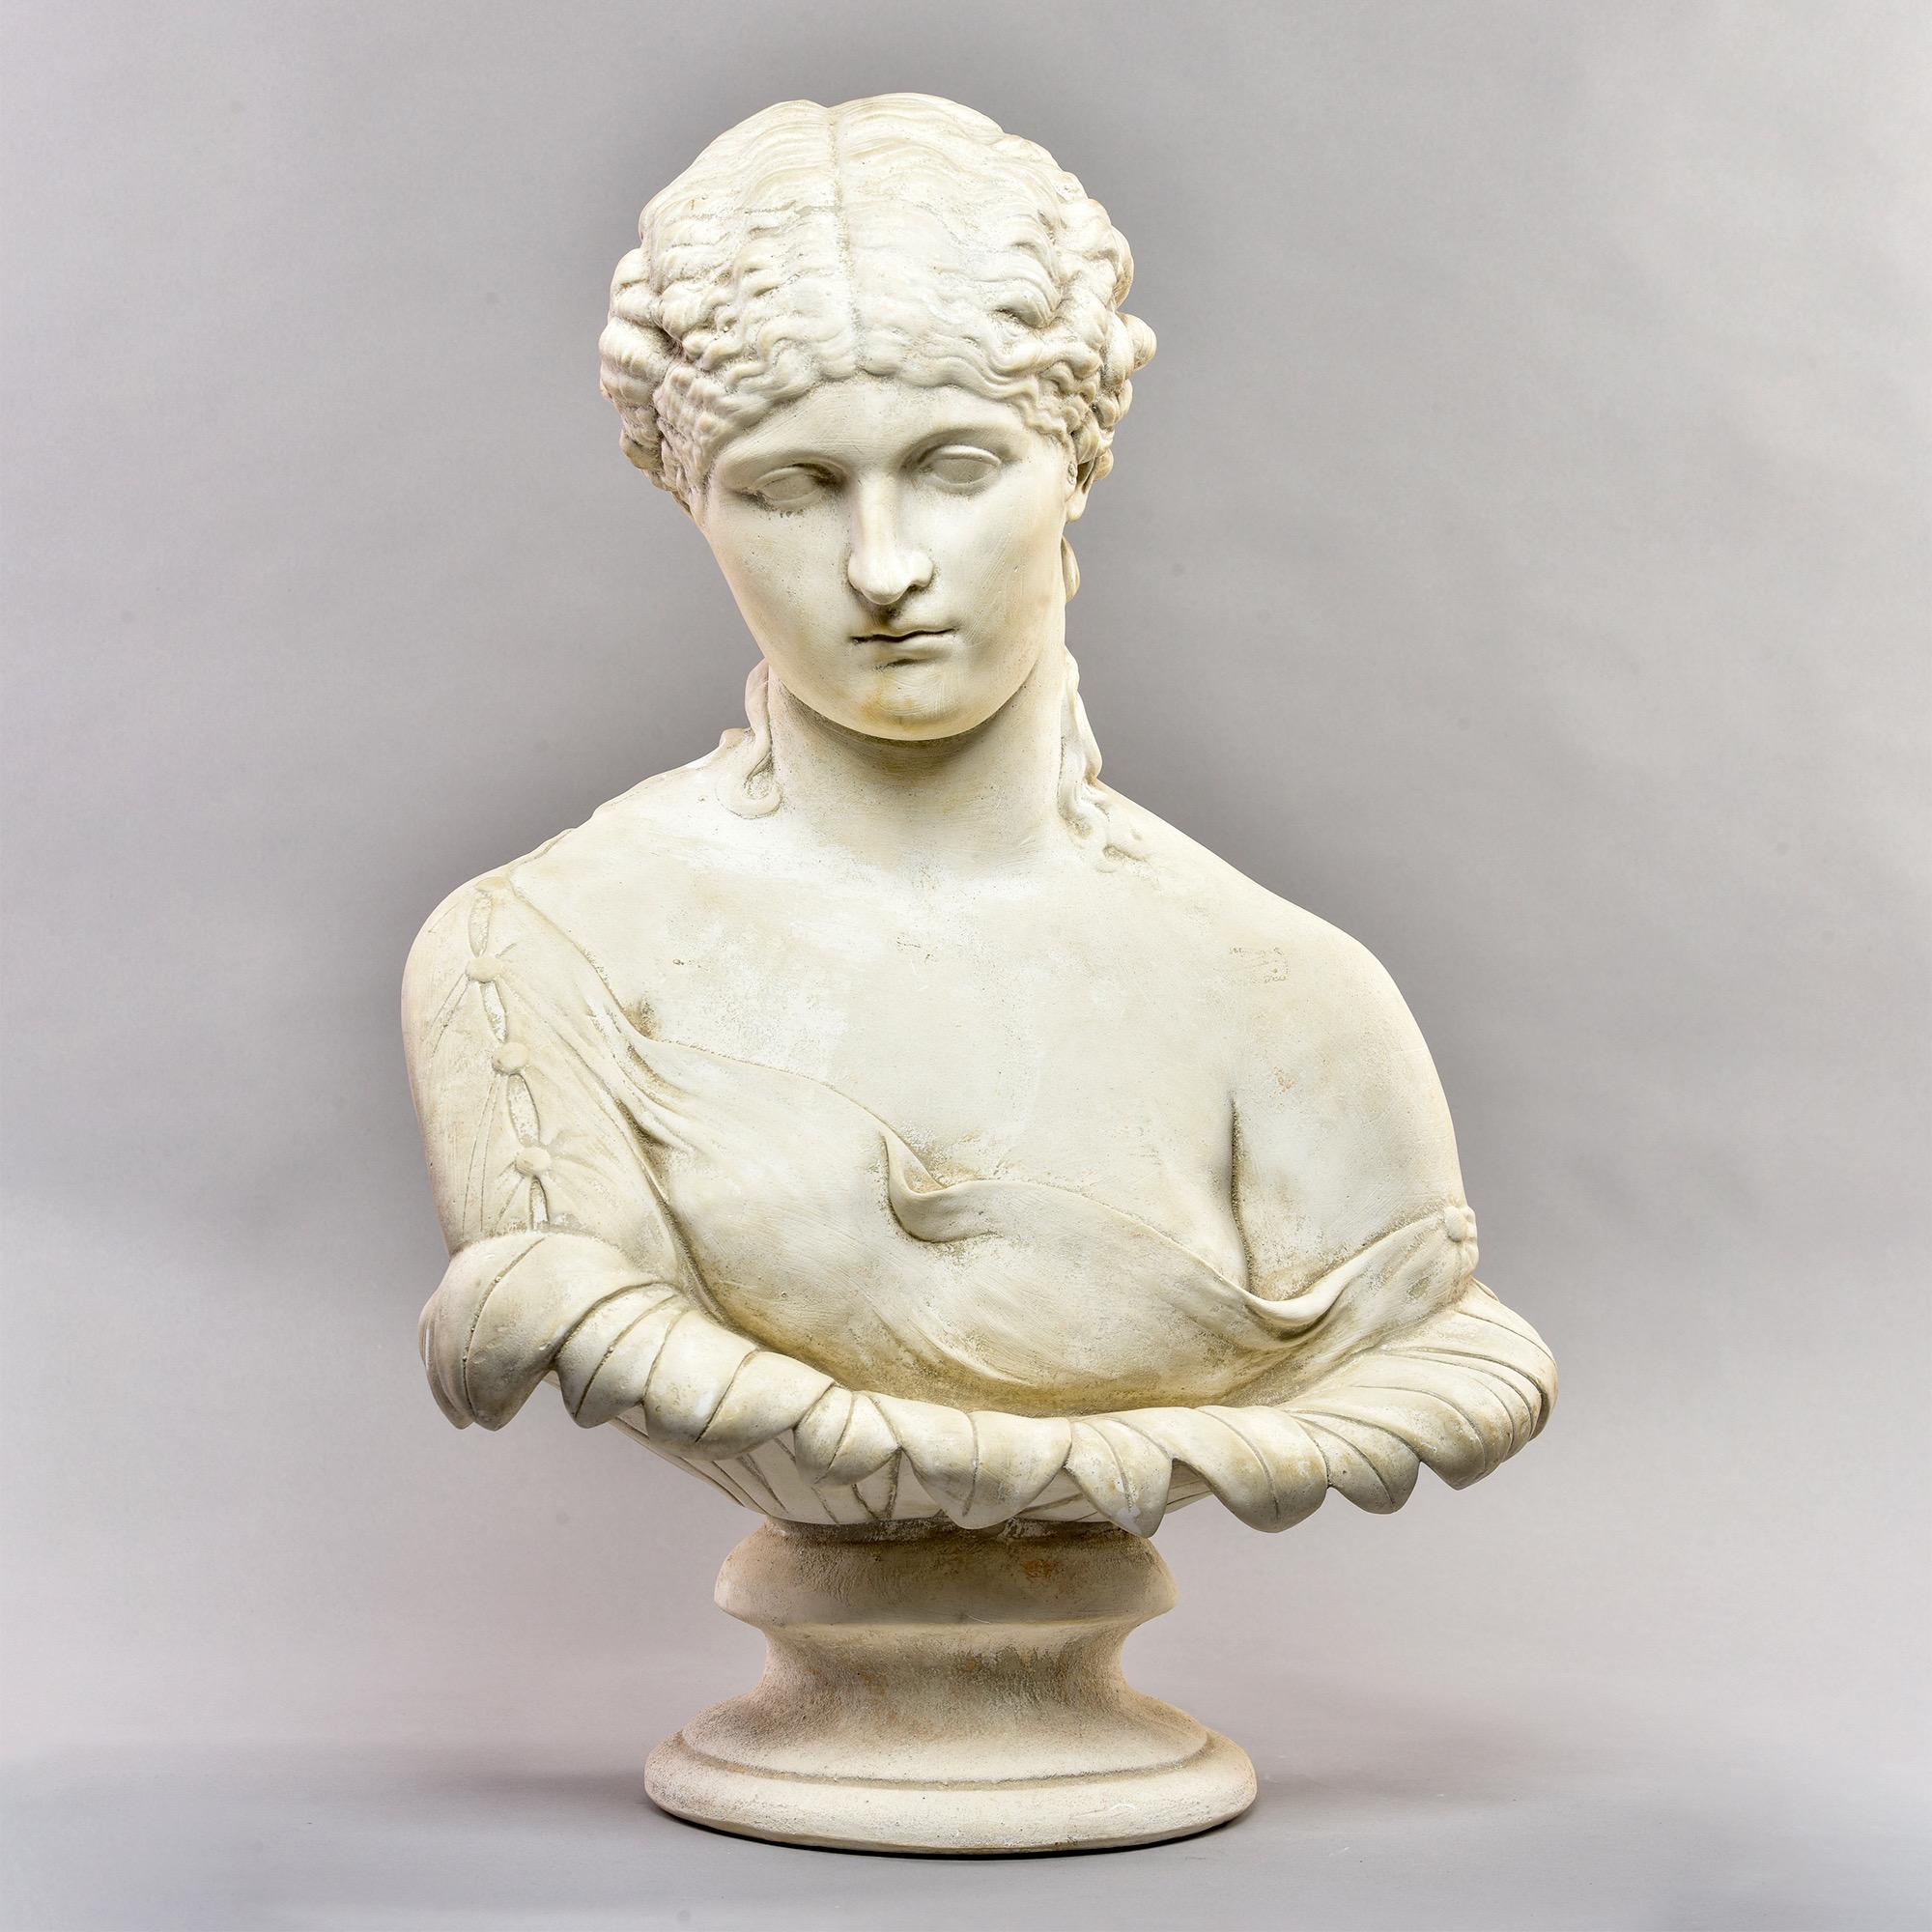 Classical bust of Greek figure in plaster composite on pedestal base. Beautifully rendered with fine detail. Found at US estate - unknown maker and age.